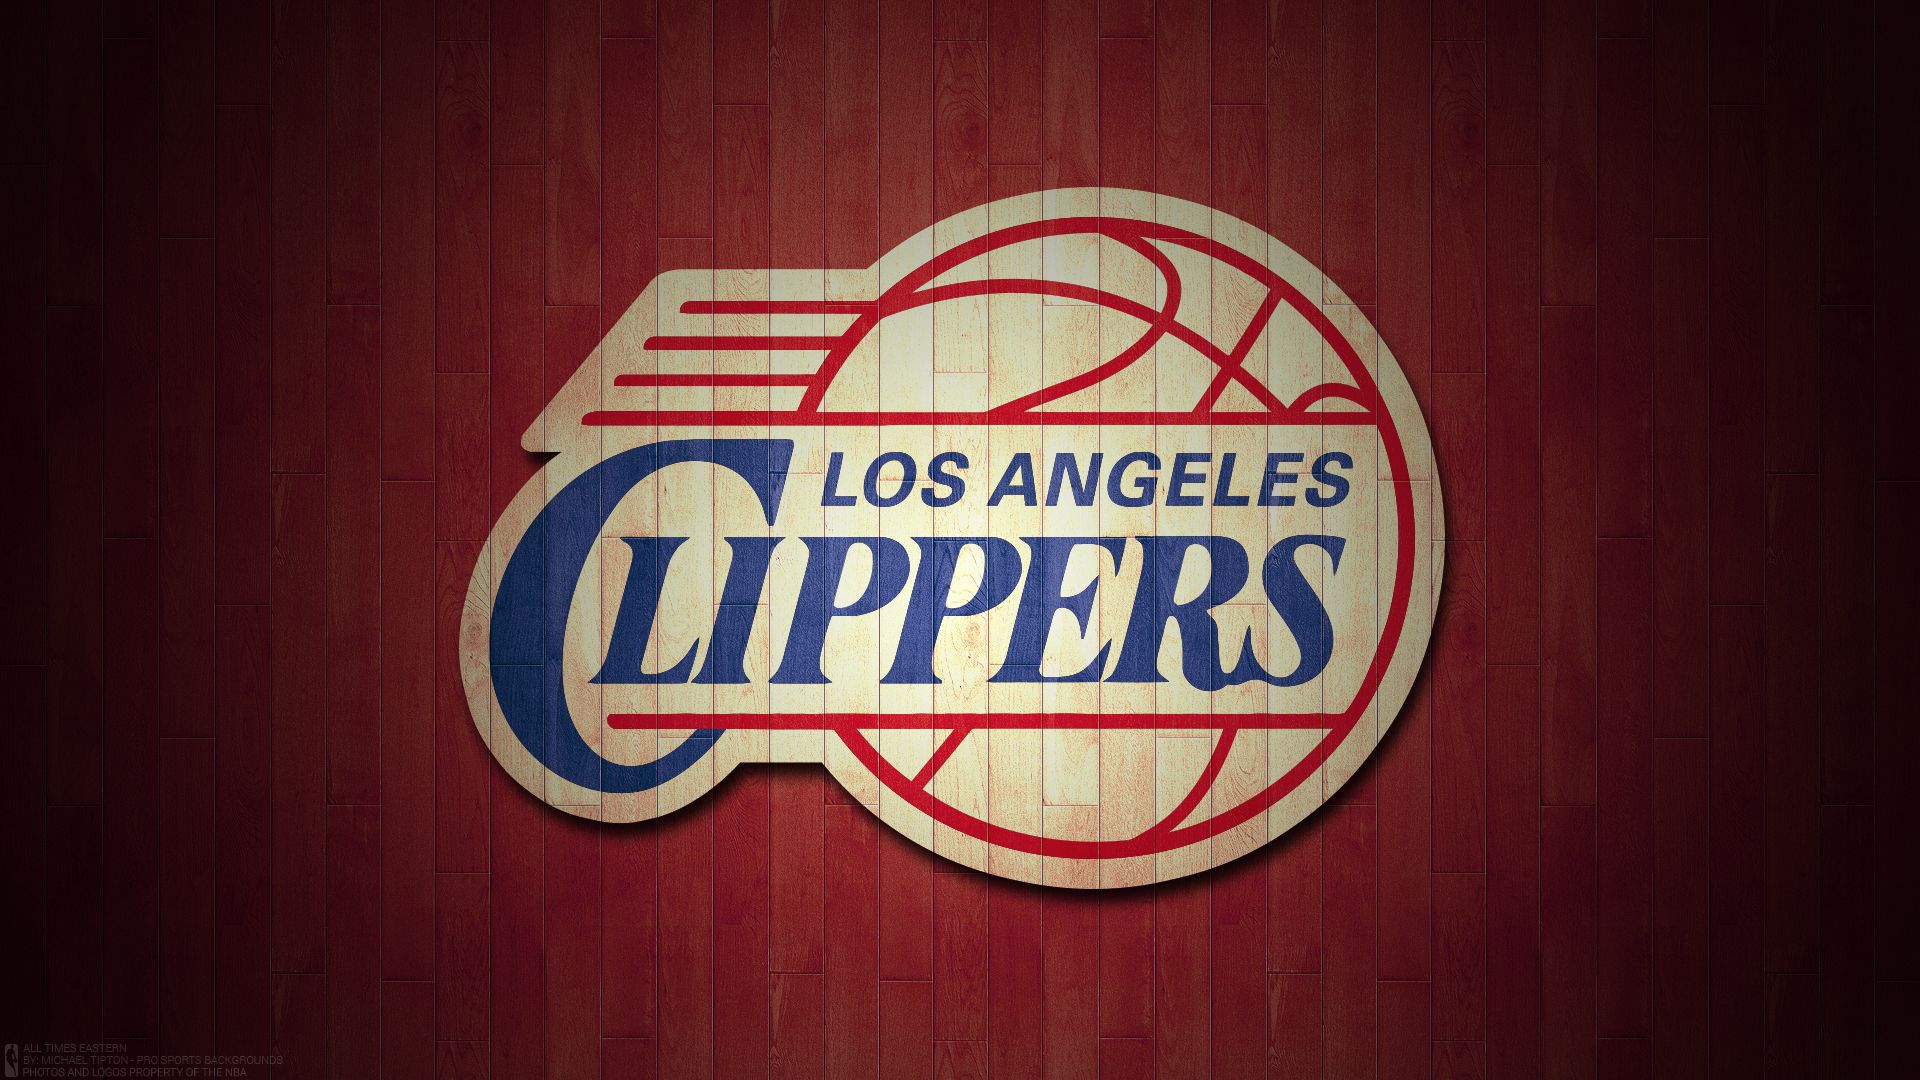 nba, sports, los angeles clippers, basketball, logo